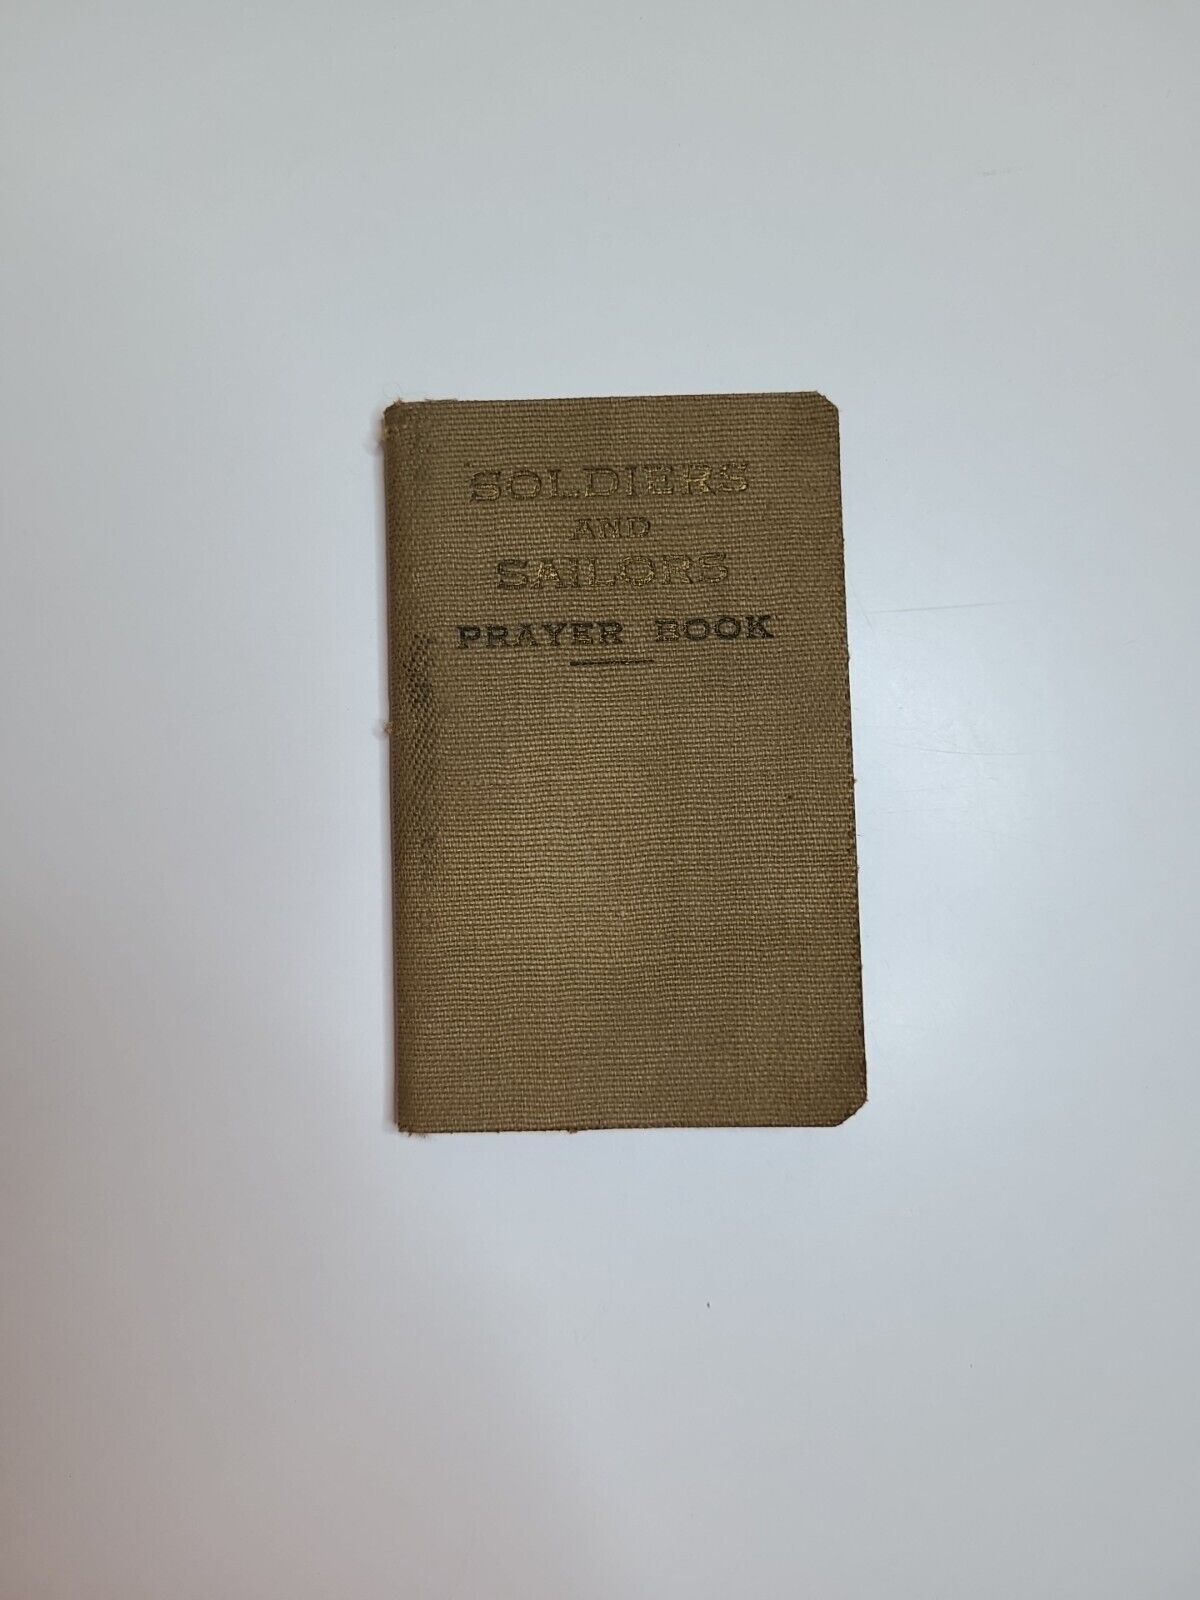 Vintage WWII Booklet 1940 Soldiers And Sailors Prayer Book World War Two WW2